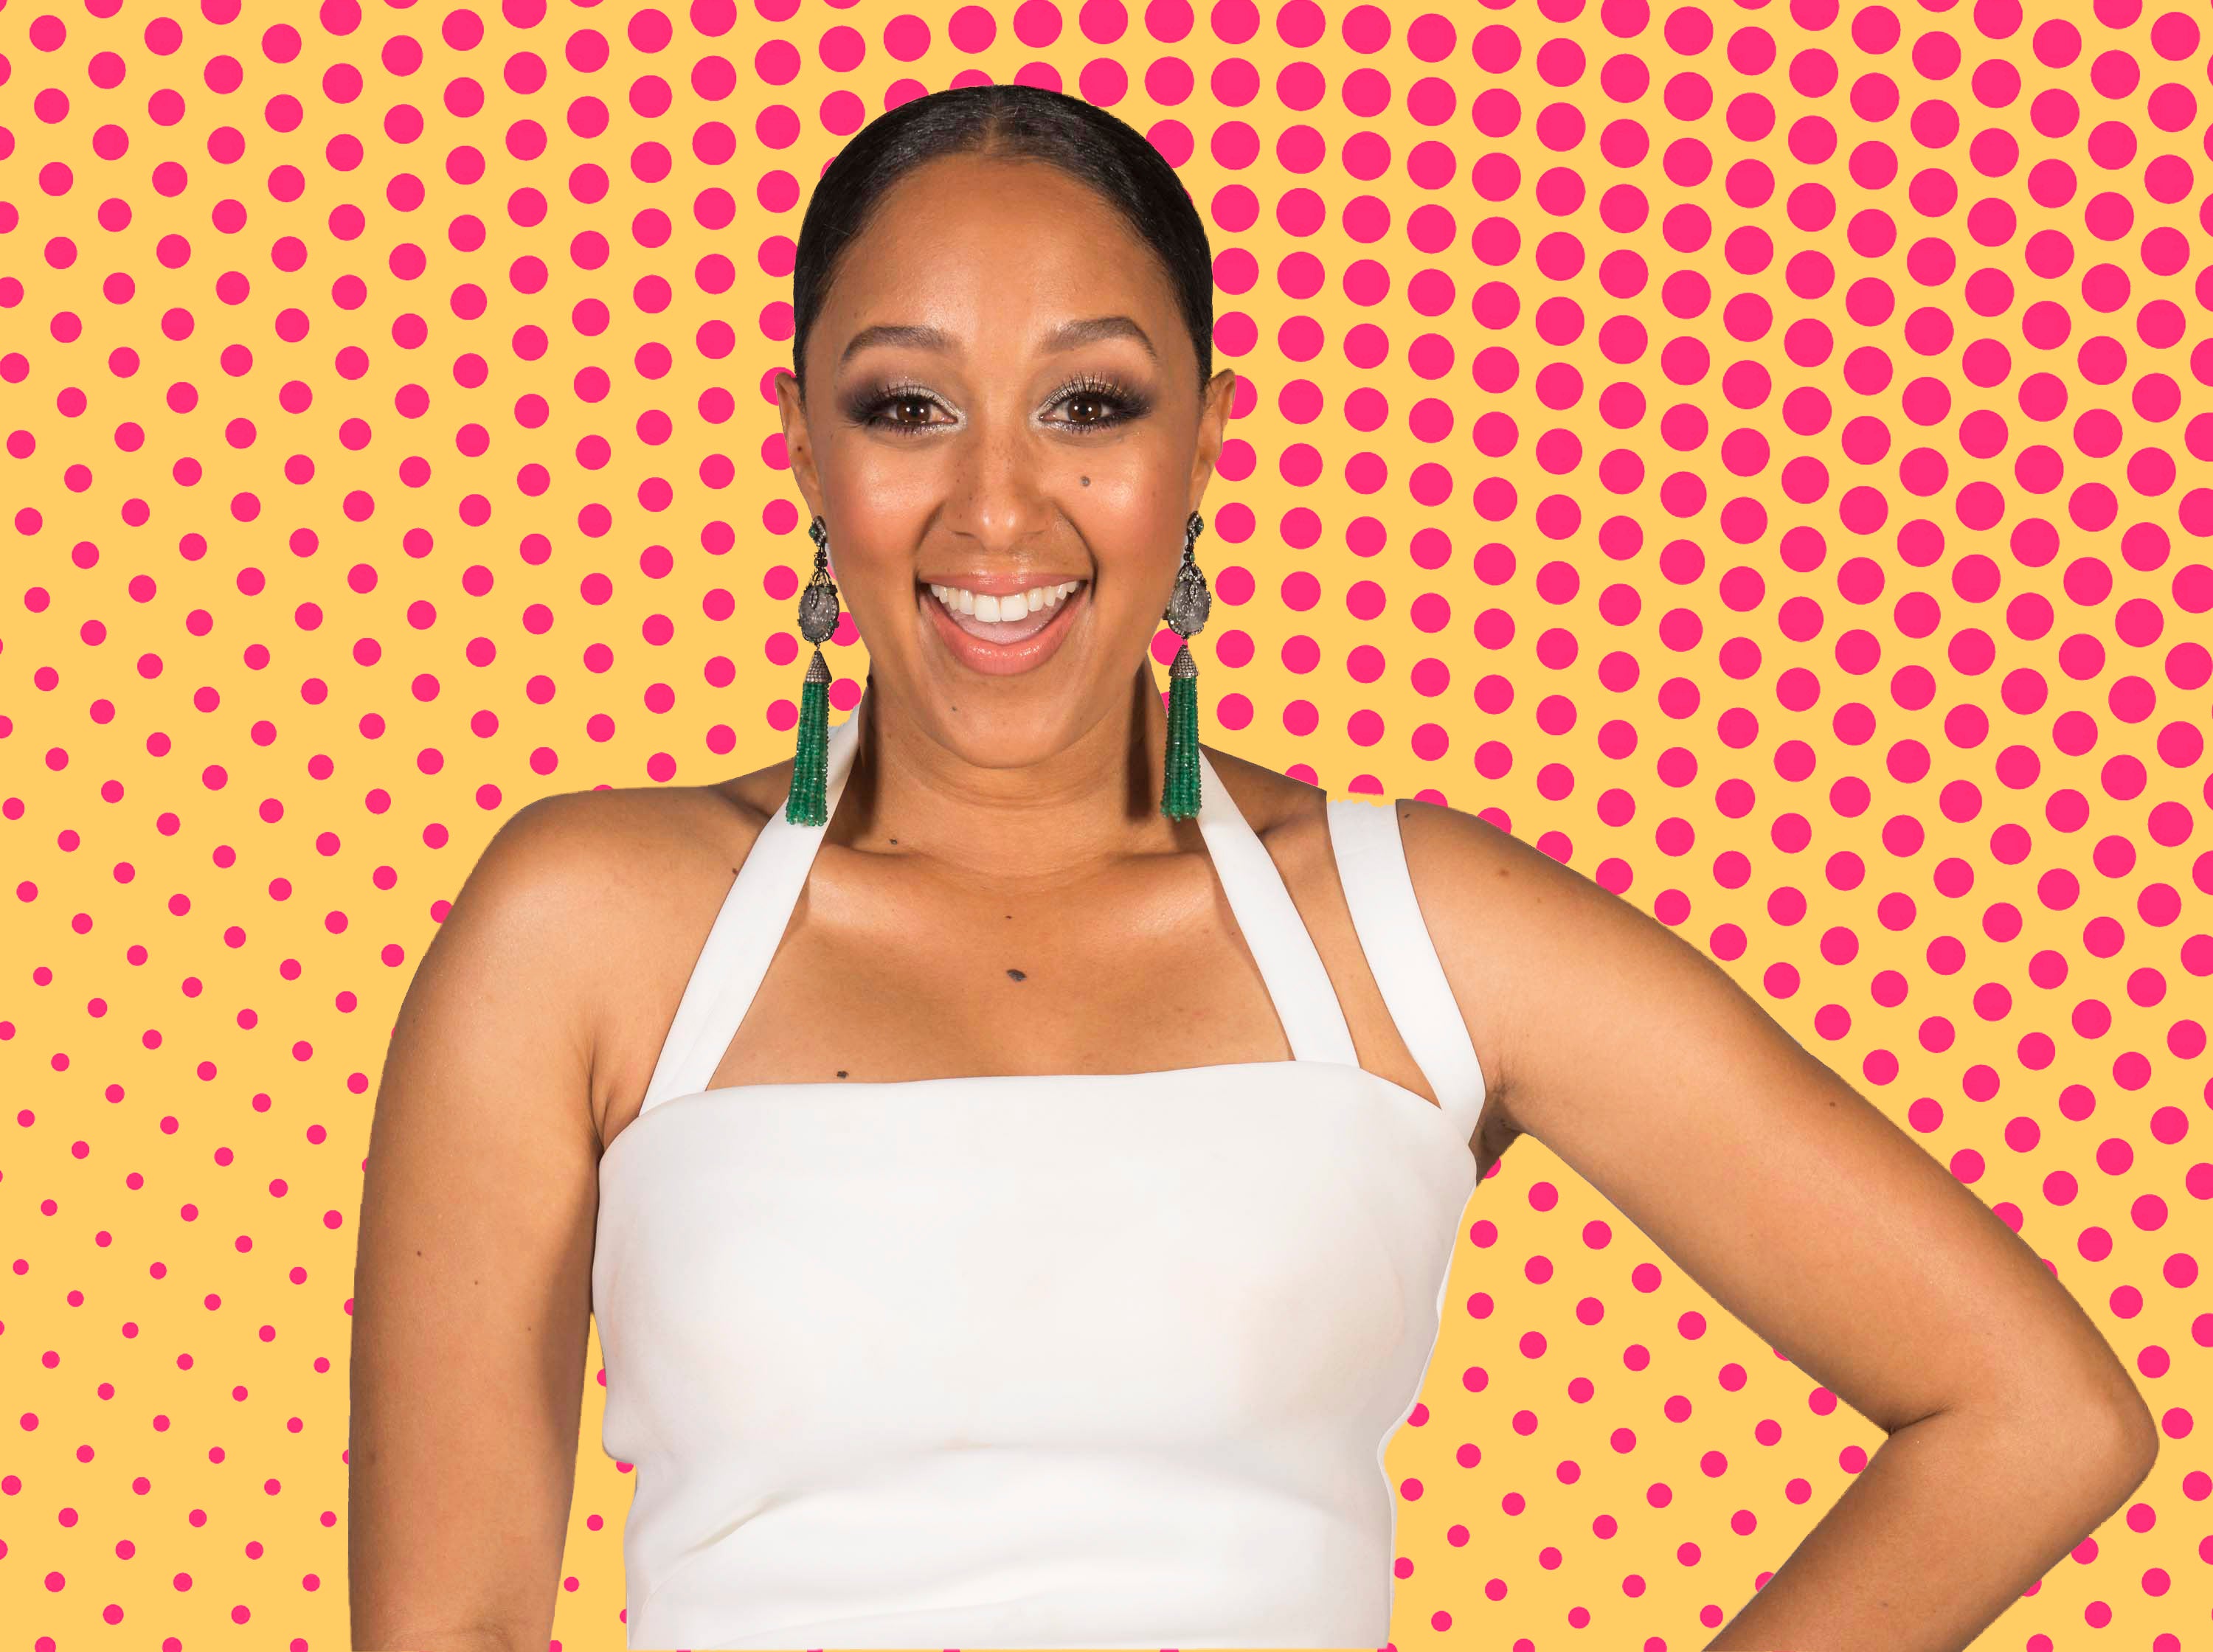 Tamera Mowry-Housley Explains Why She's 'Done Having Kids': 'Parenting Is Work'